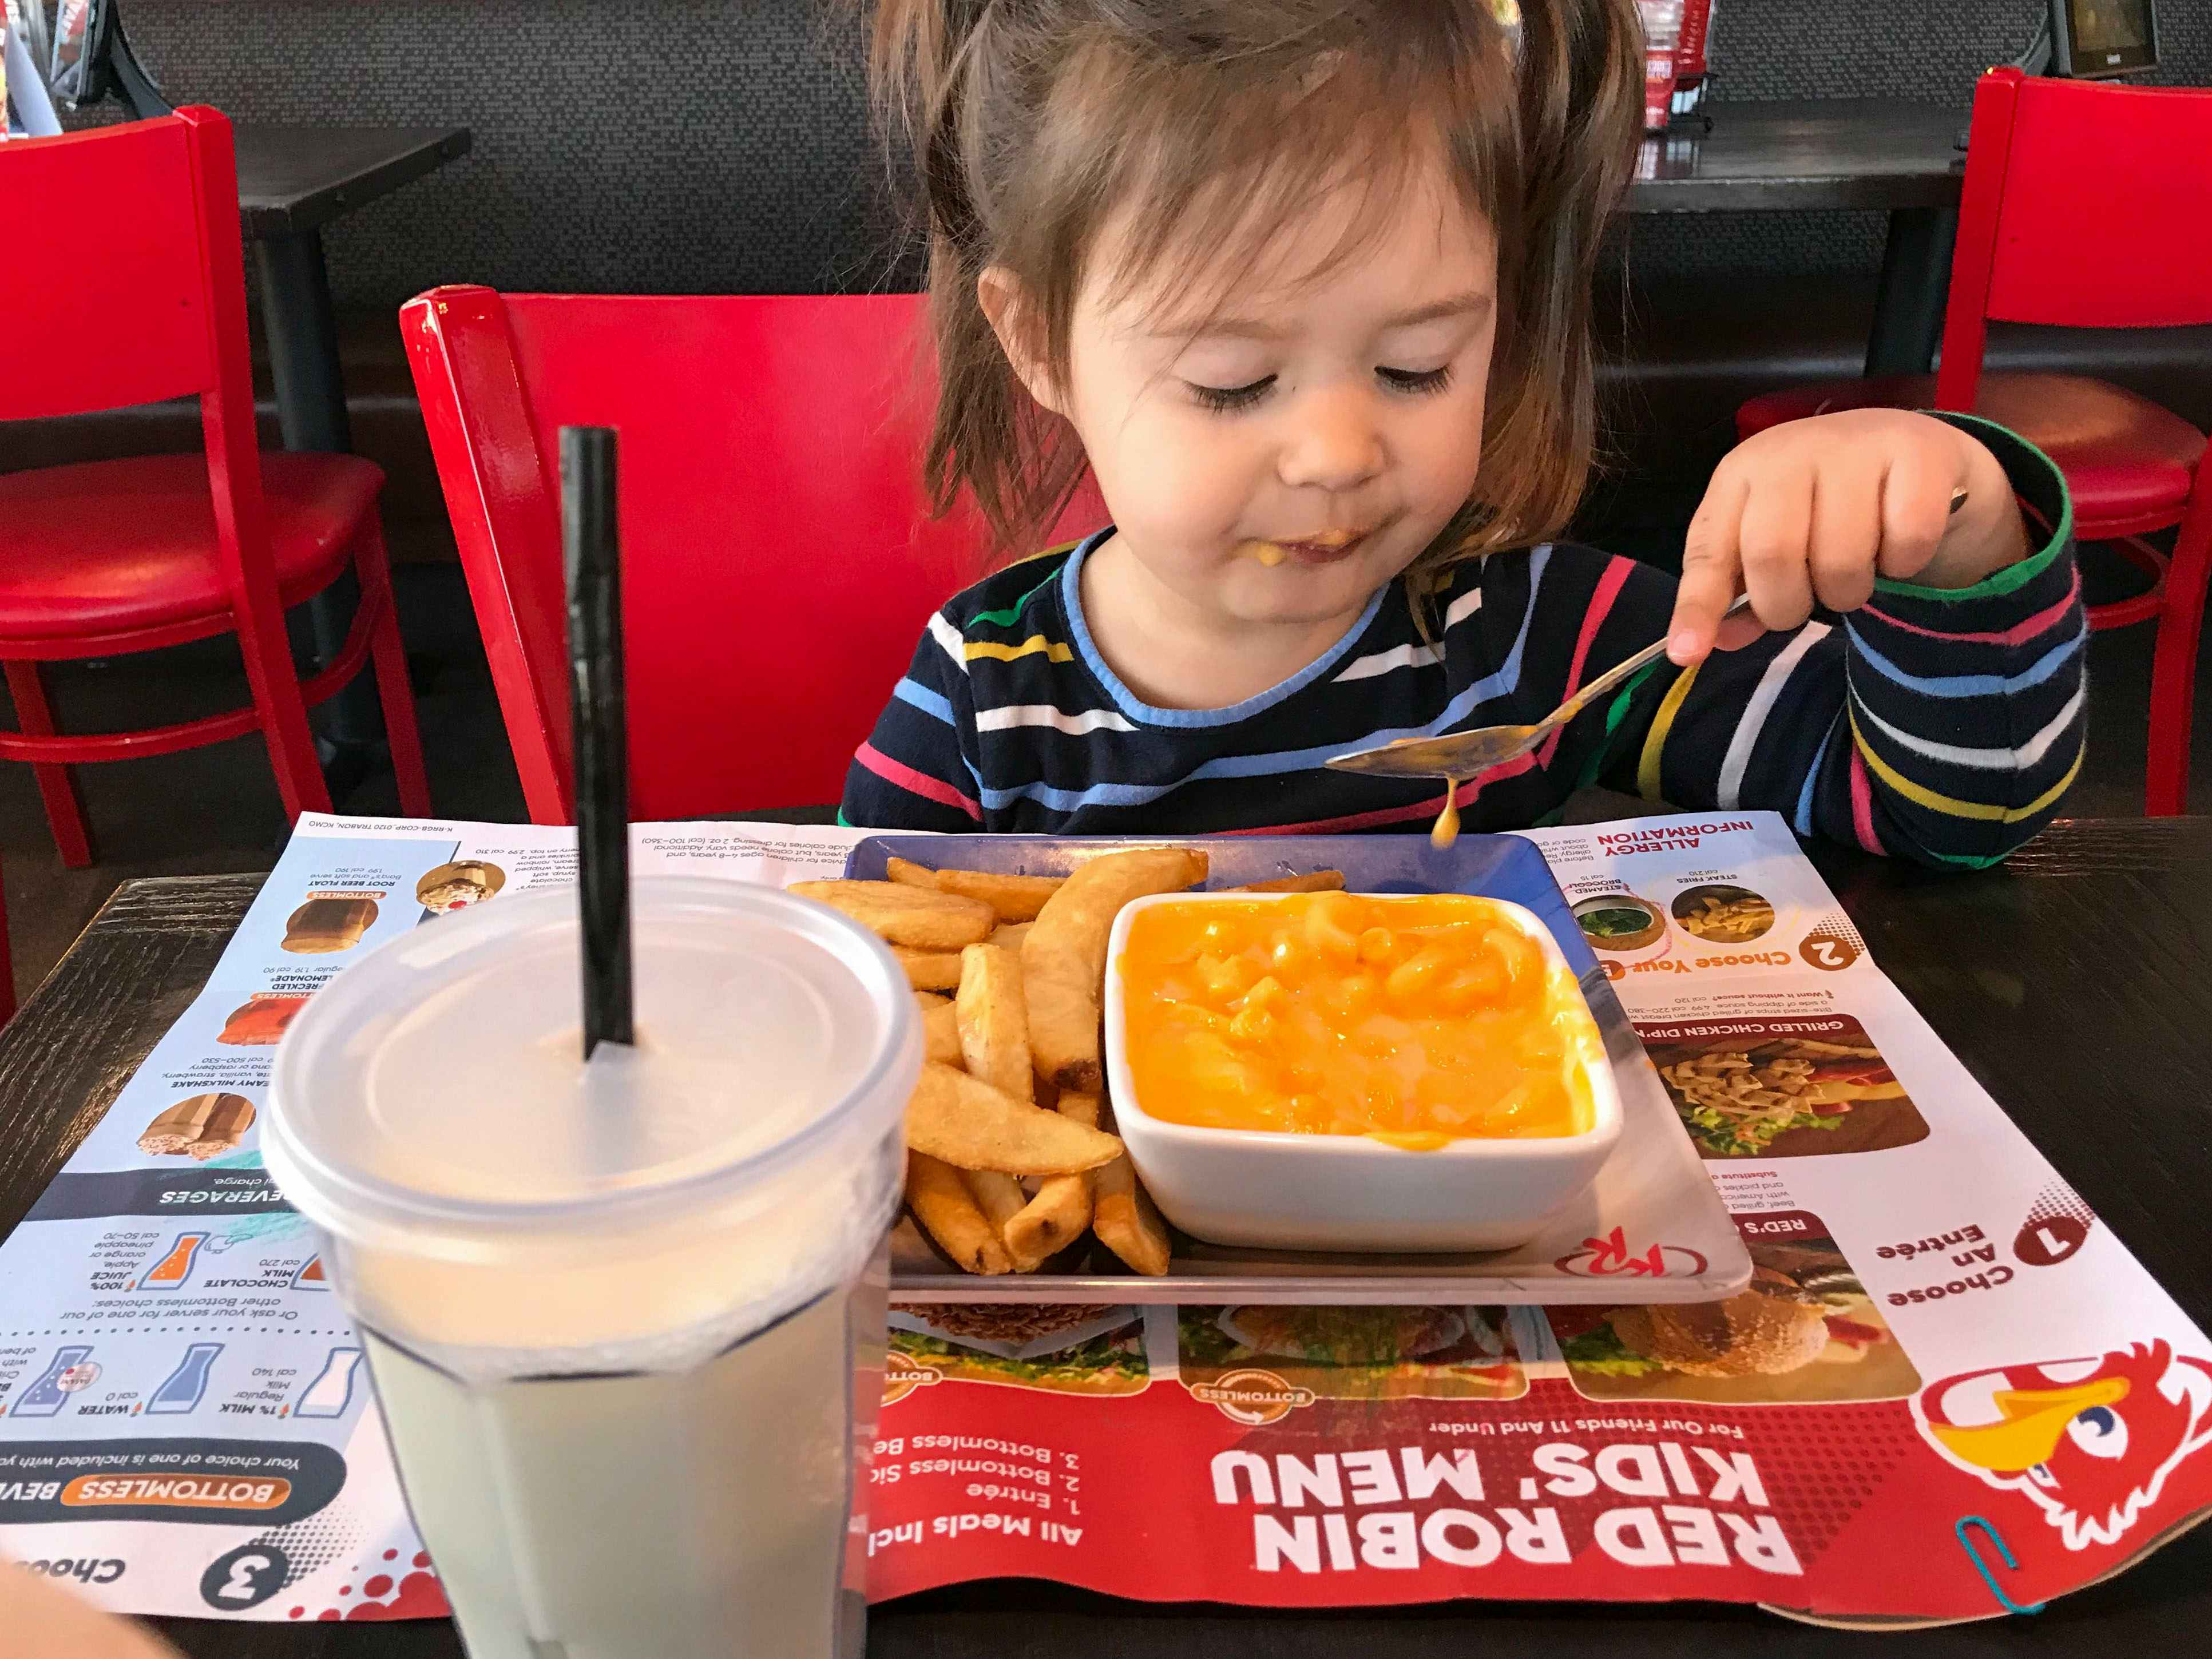 A child sitting in a Red Robin booth eating mac and cheese with a spoon, with a glass of milk in front of her.